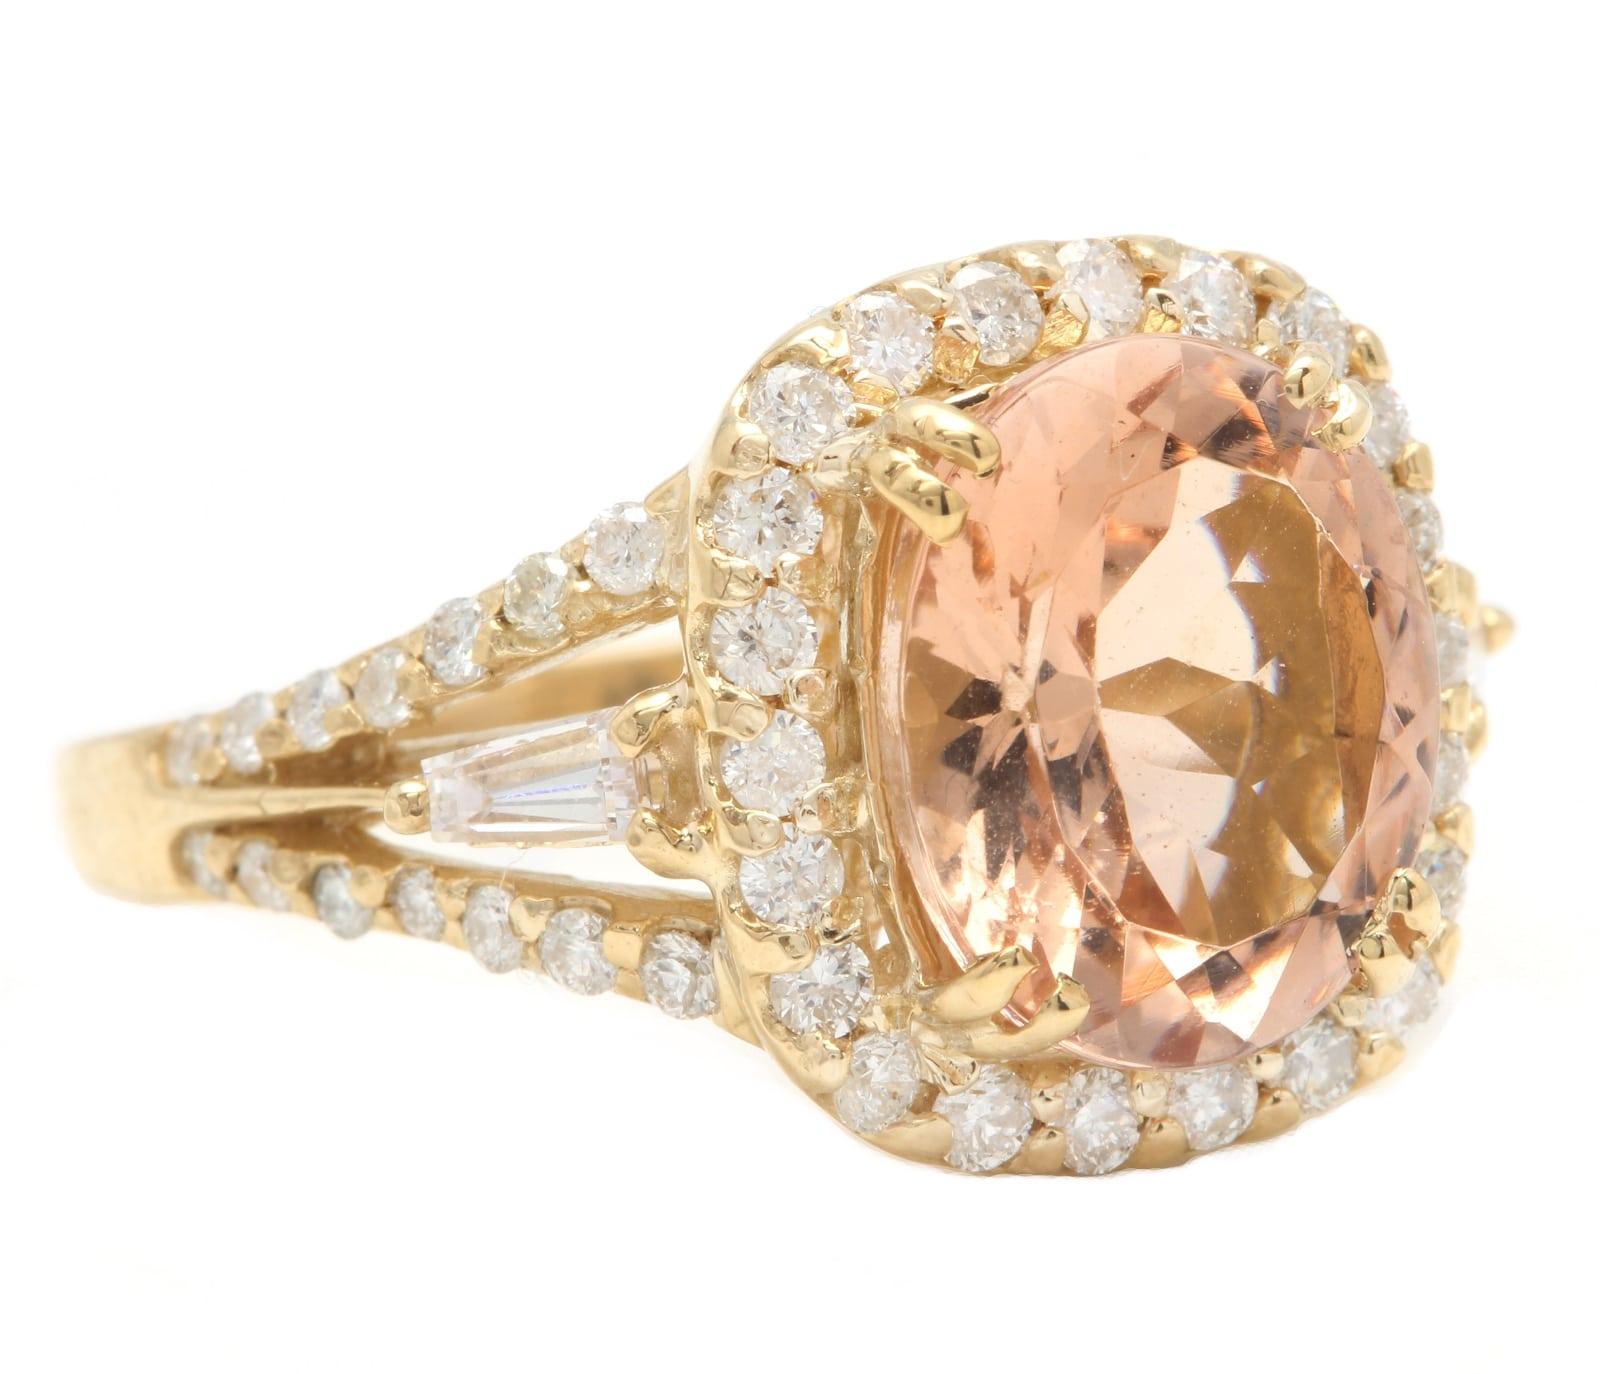 5.20 Carats Exquisite Natural Morganite and Diamond 14K Solid Yellow Gold Ring

Suggested Replacement Value: $6,000.00

Total Natural Cushion Morganite Weights: Approx. 4.20 Carats

Morganite Measures: Approx. 11.00 x 9.00mm

Natural Round &